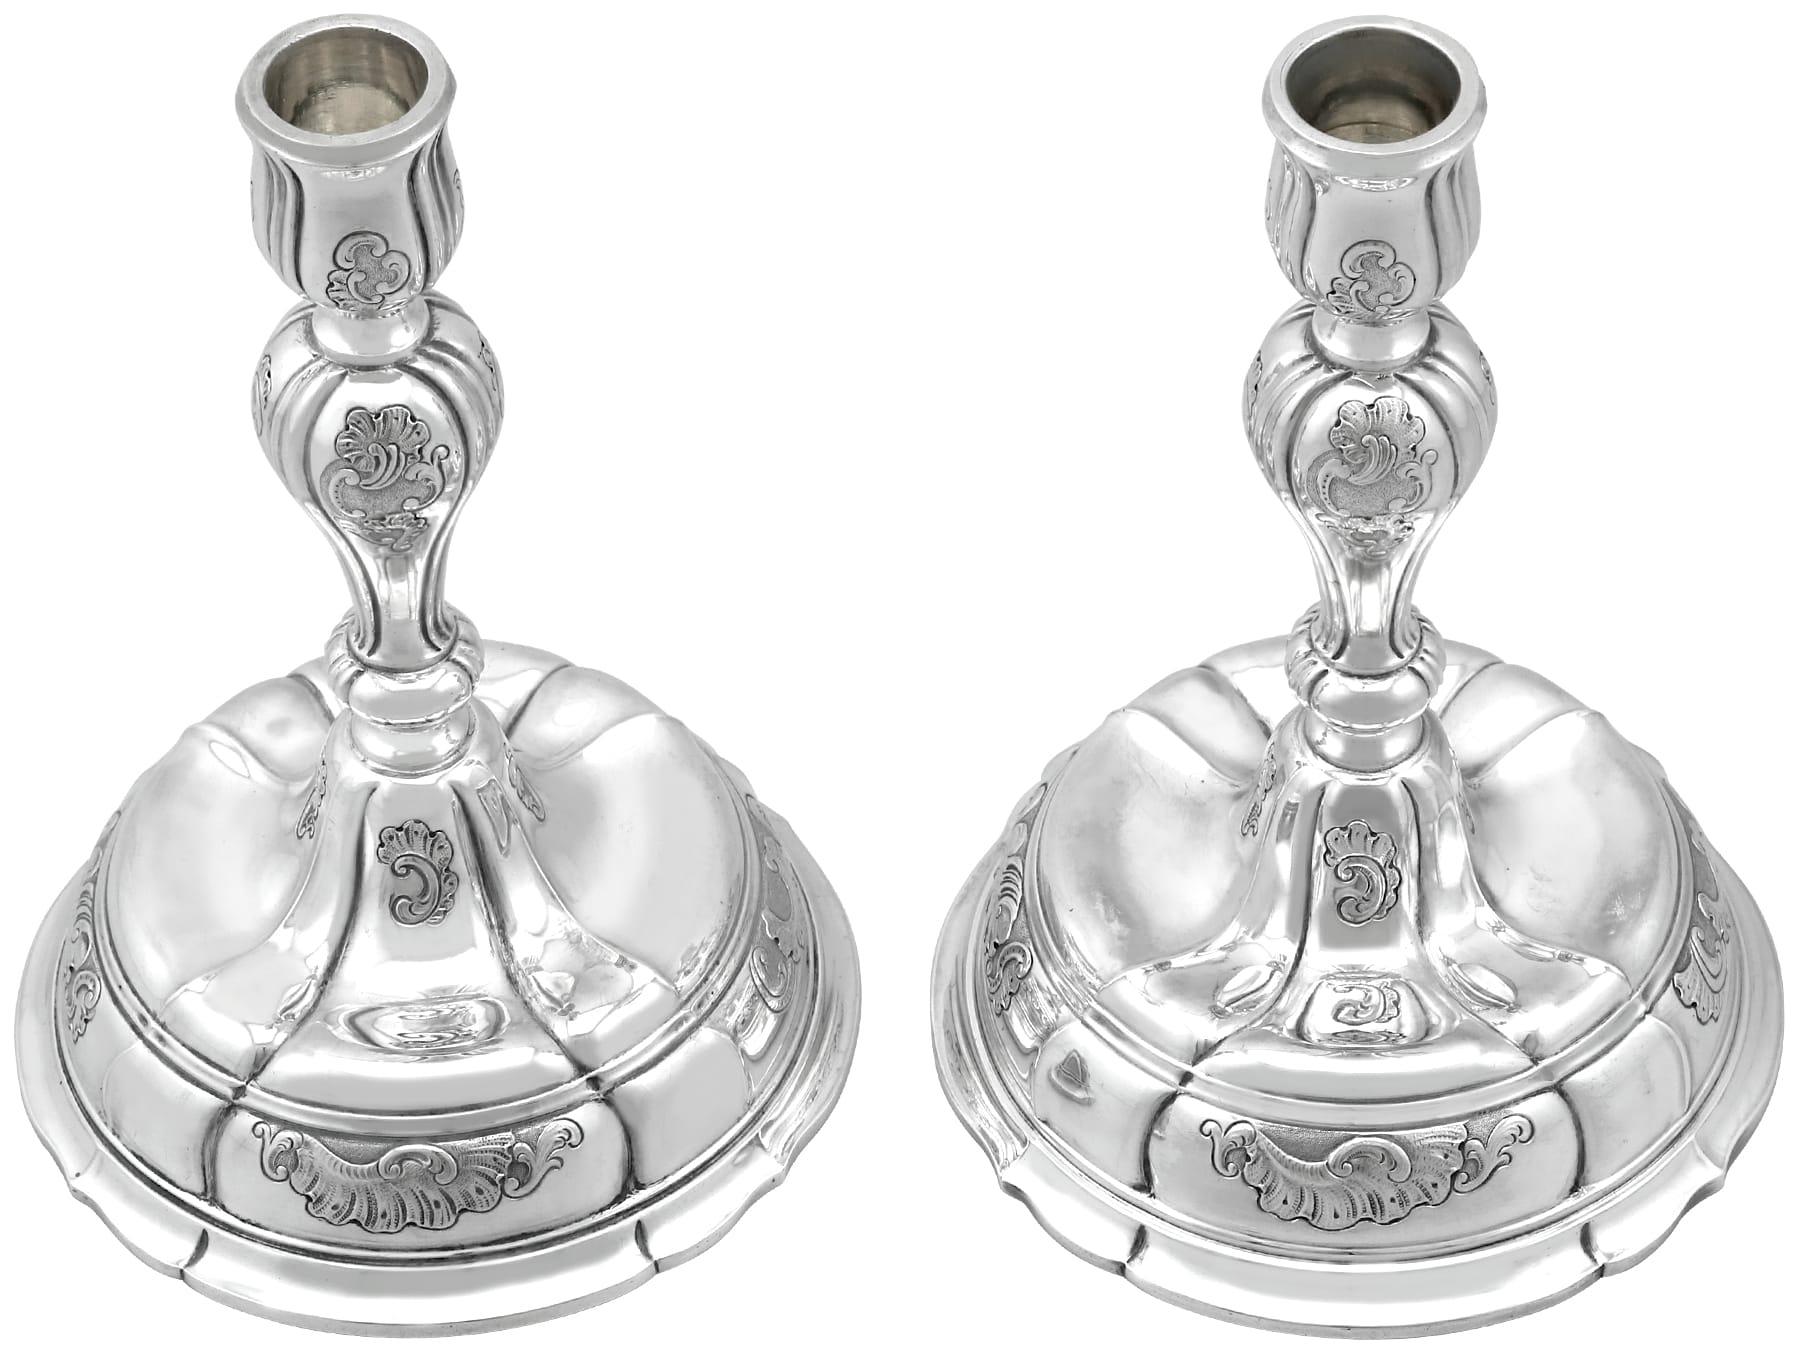 An exceptional, fine and impressive pair of antique Danish silver candlesticks made by Georg Jensen; an addition to our ornamental silverware collection.

These exceptional antique Danish silver candle holders have a baluster, circular rounded